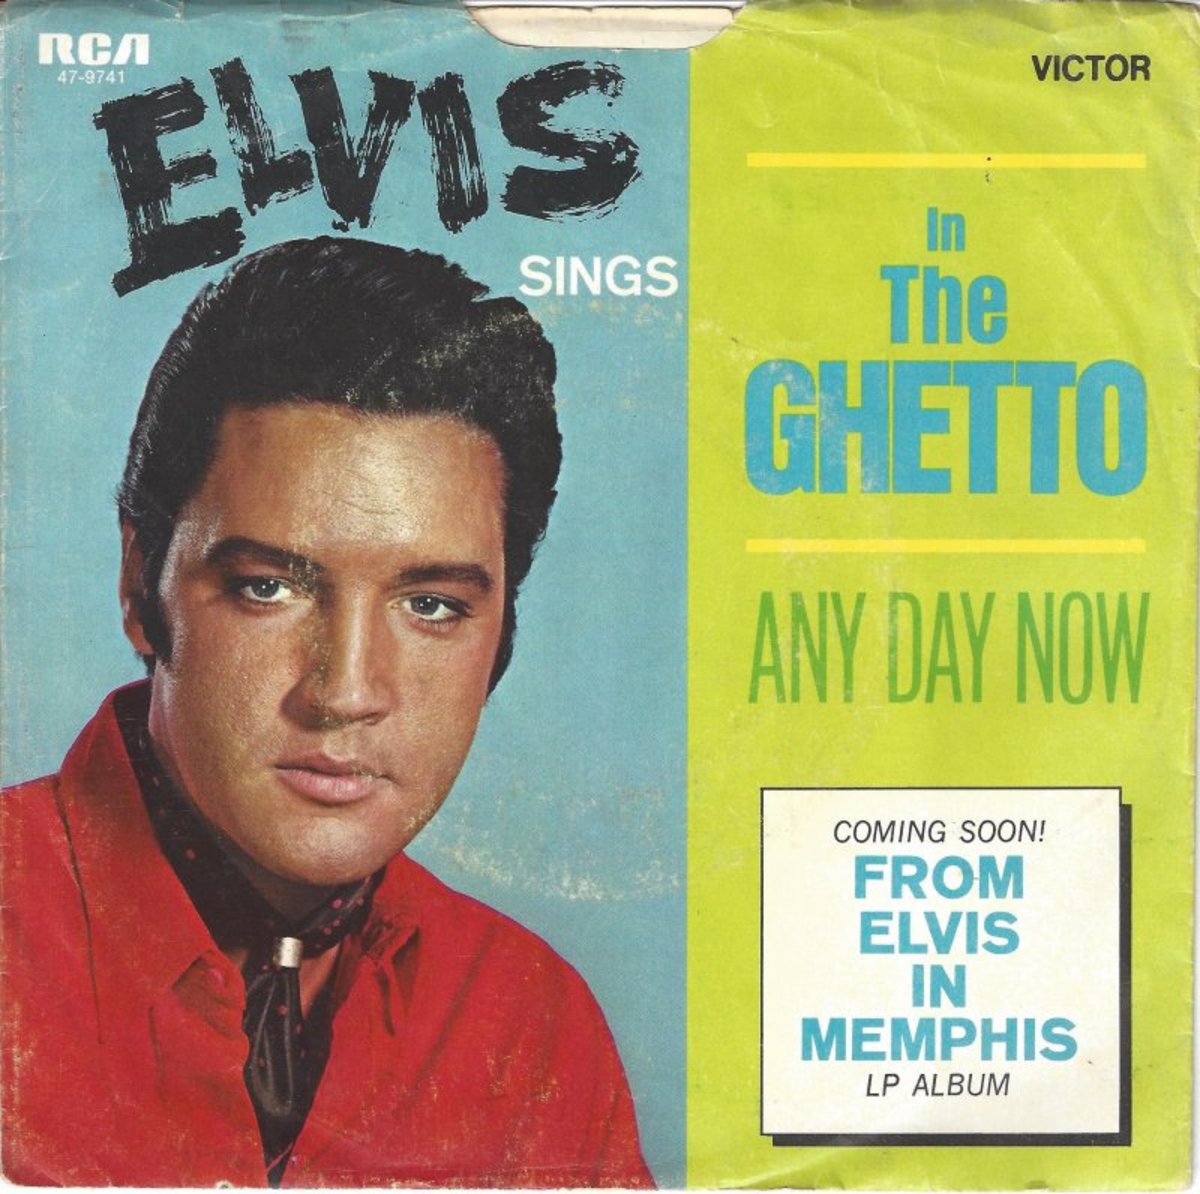 In The Ghetto 7-inch single, 45rpm w/ picture sleeve, on RCA Victor 47-9741, worth $60 in NM condition. Image courtesy of 45cat.com.